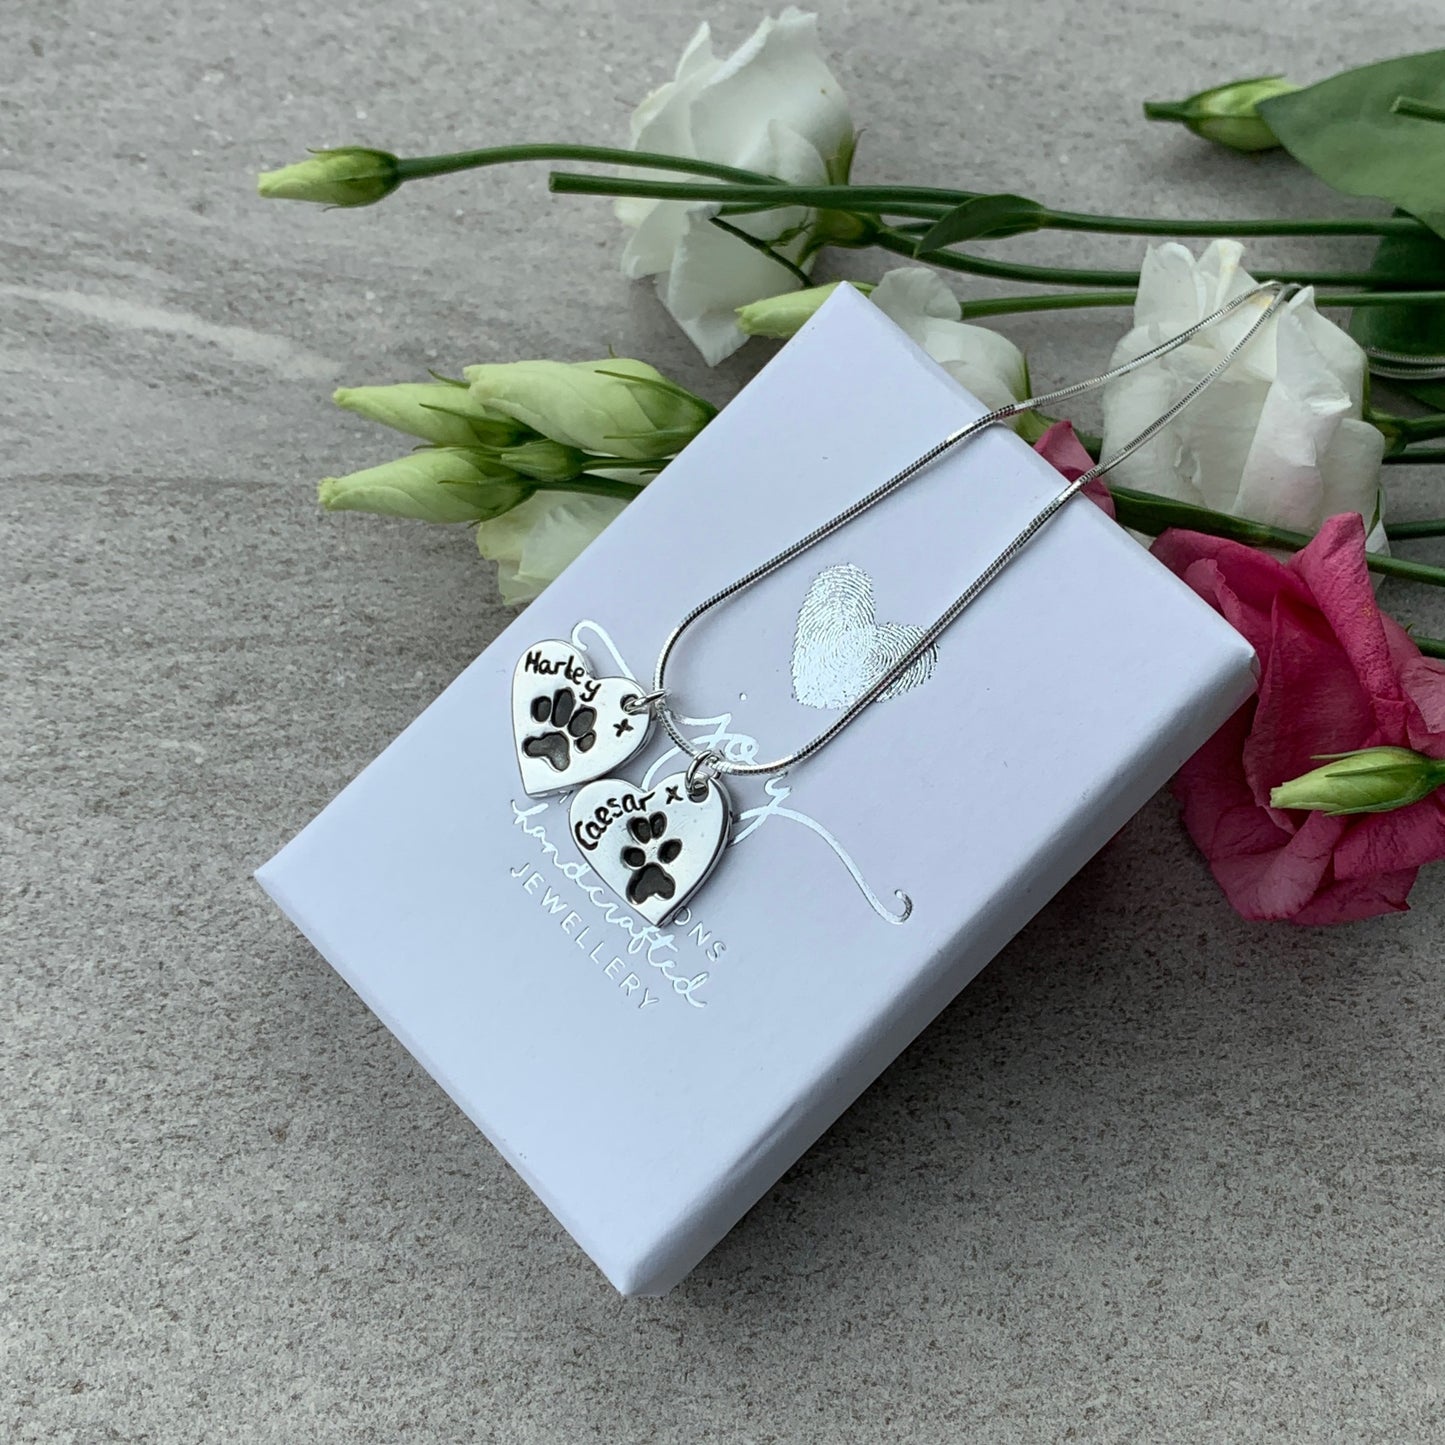 2 heart pawprint charms on sterling silver necklace by Joy Impressions